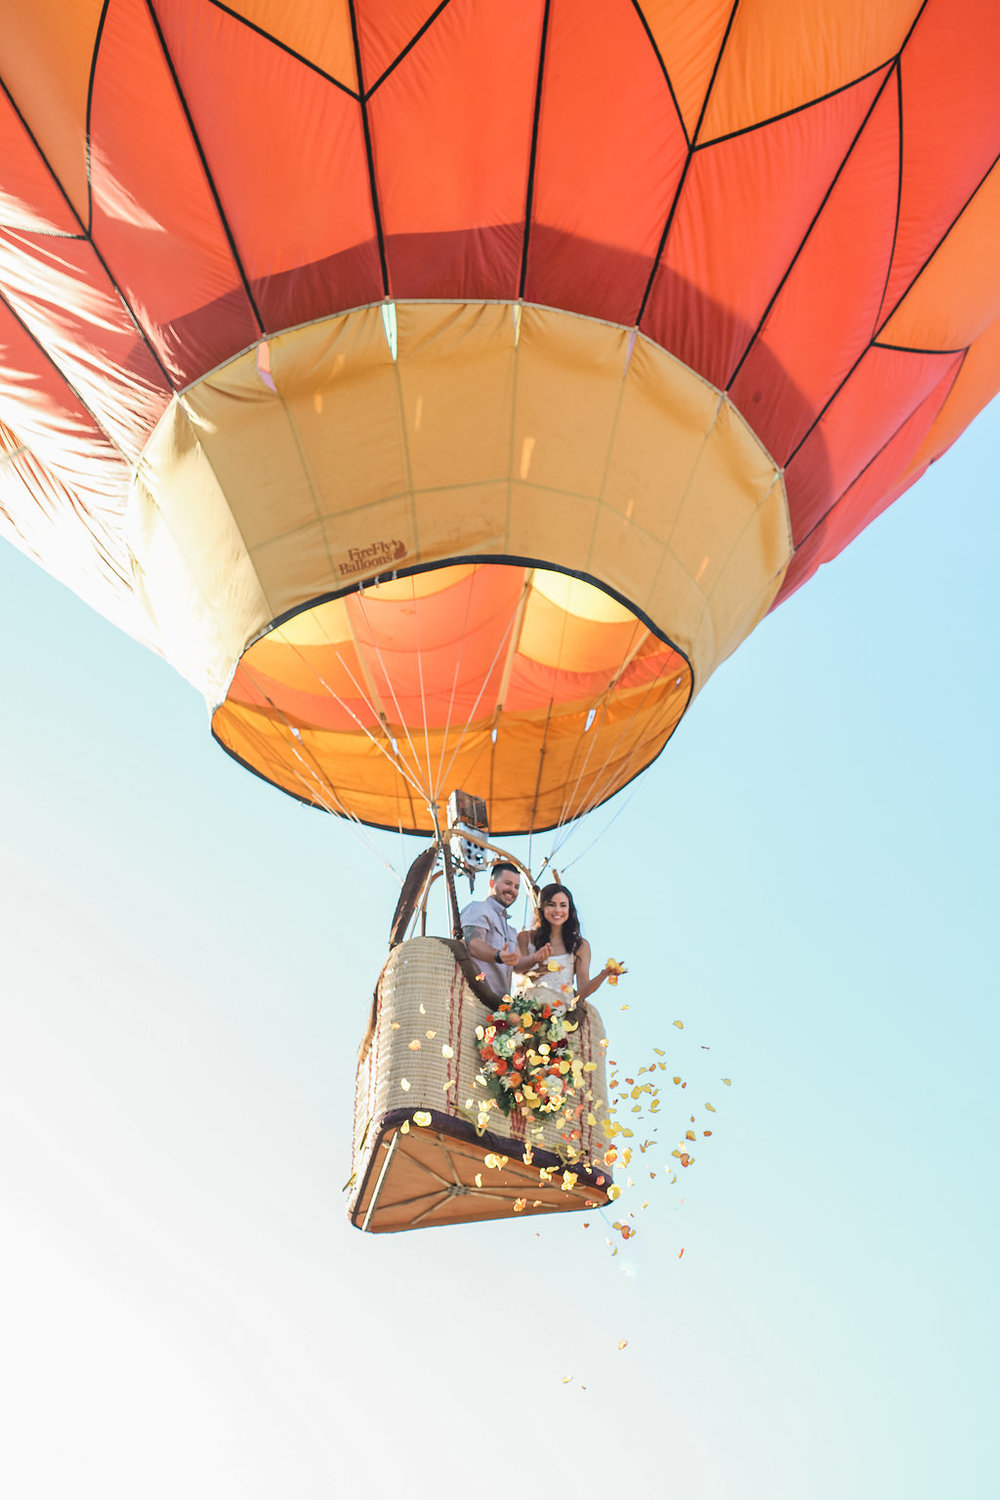  Photographer:   Heather Anderson Photography  | Hot Air Balloon Pilot: Kurt Adelsberger | Planner & Stylist:  Blissfully Styled  | Rentals & Styling:  Rickety Swank  | Floral Design:  Heather Christan Designs  | Hair: Dannielle Robeson from  Vanity Belle  | Makeup:  Audrey Janelle Beauty  | Calligraphy:  Calligraphy by Sunny  | Venue:  Danza Del Sol Winery  